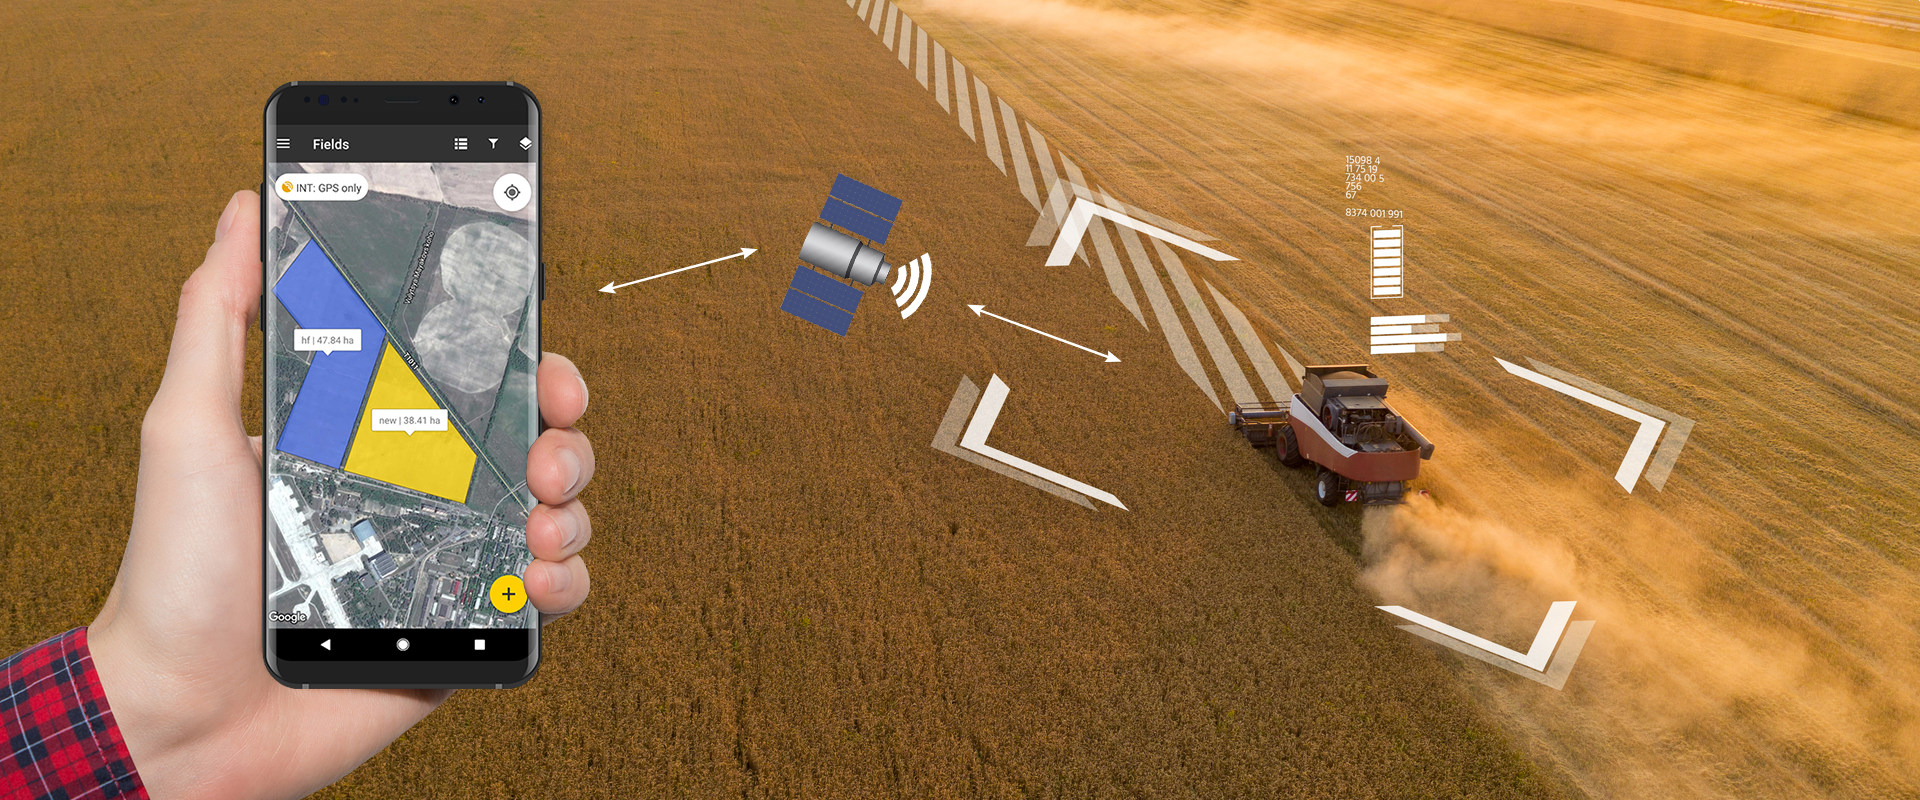 Types and applications of modern precision farming systems